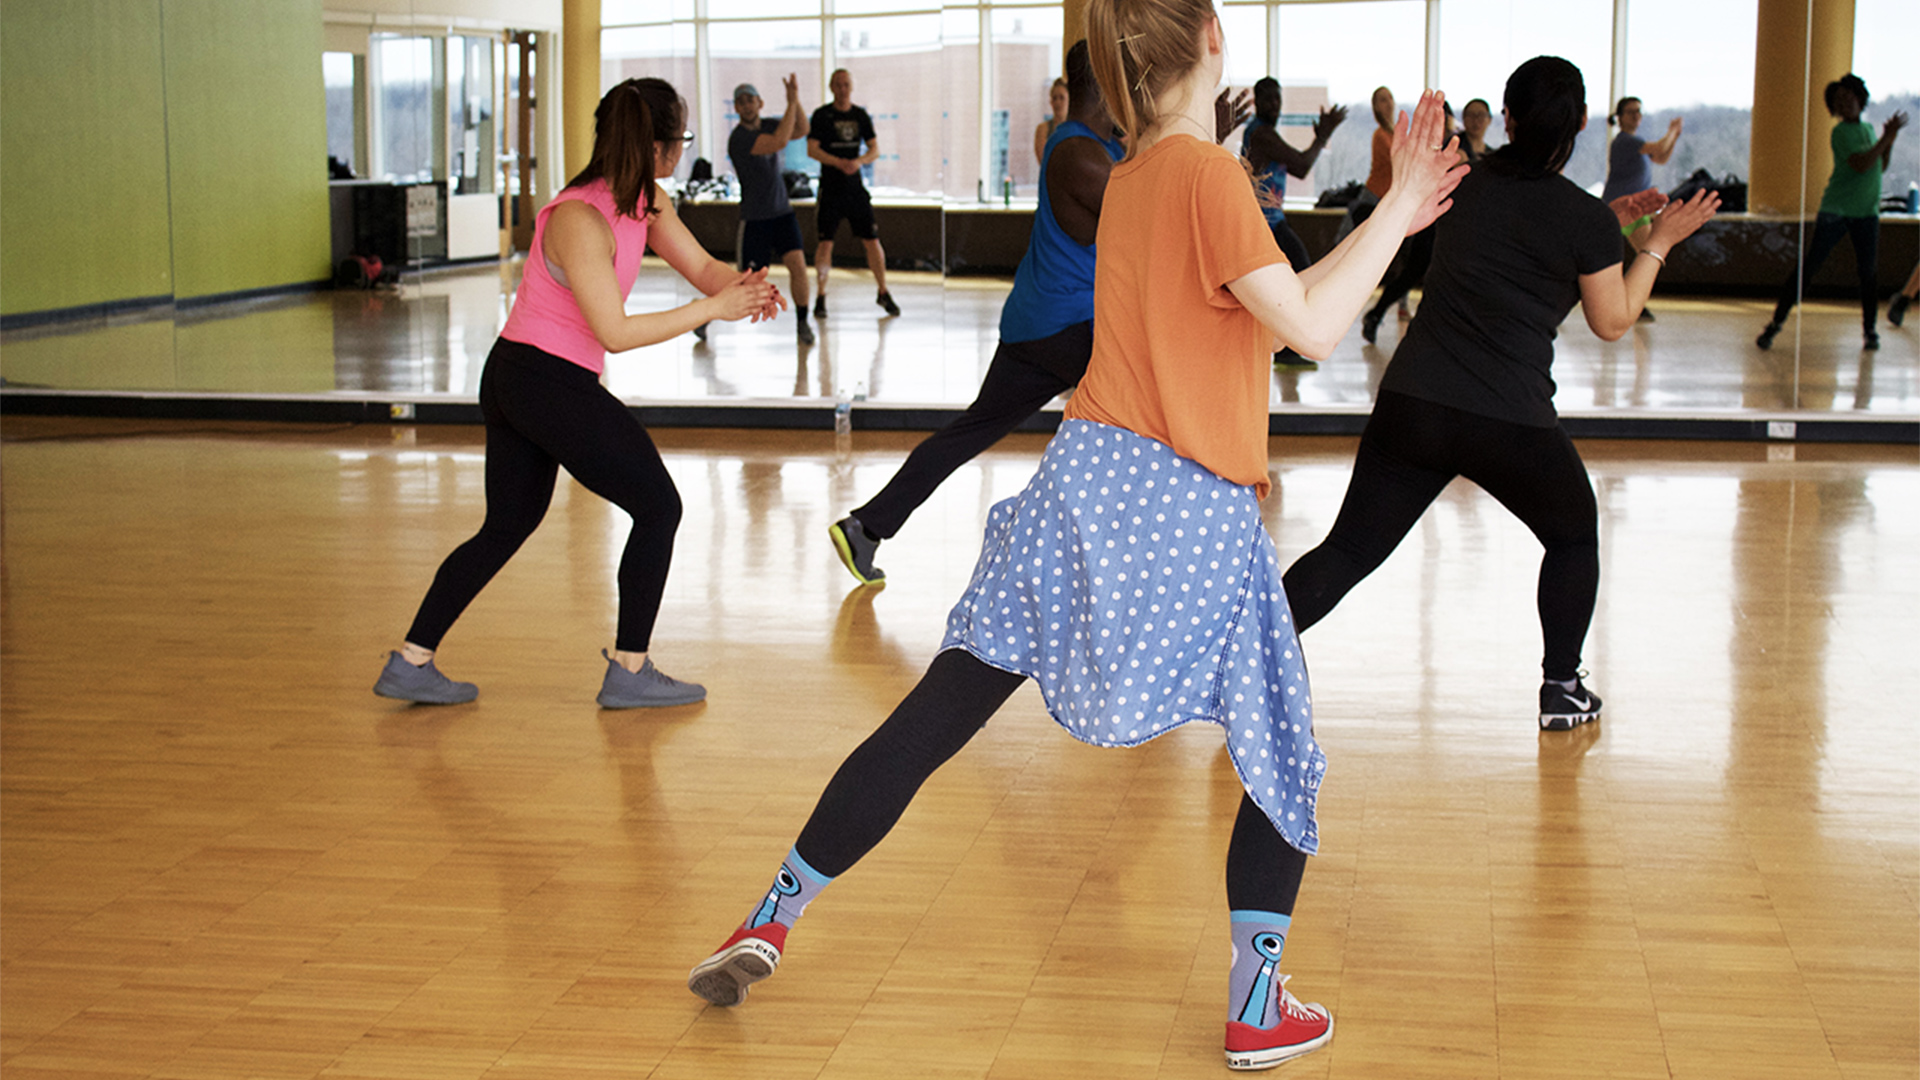 People working out in a dance studio